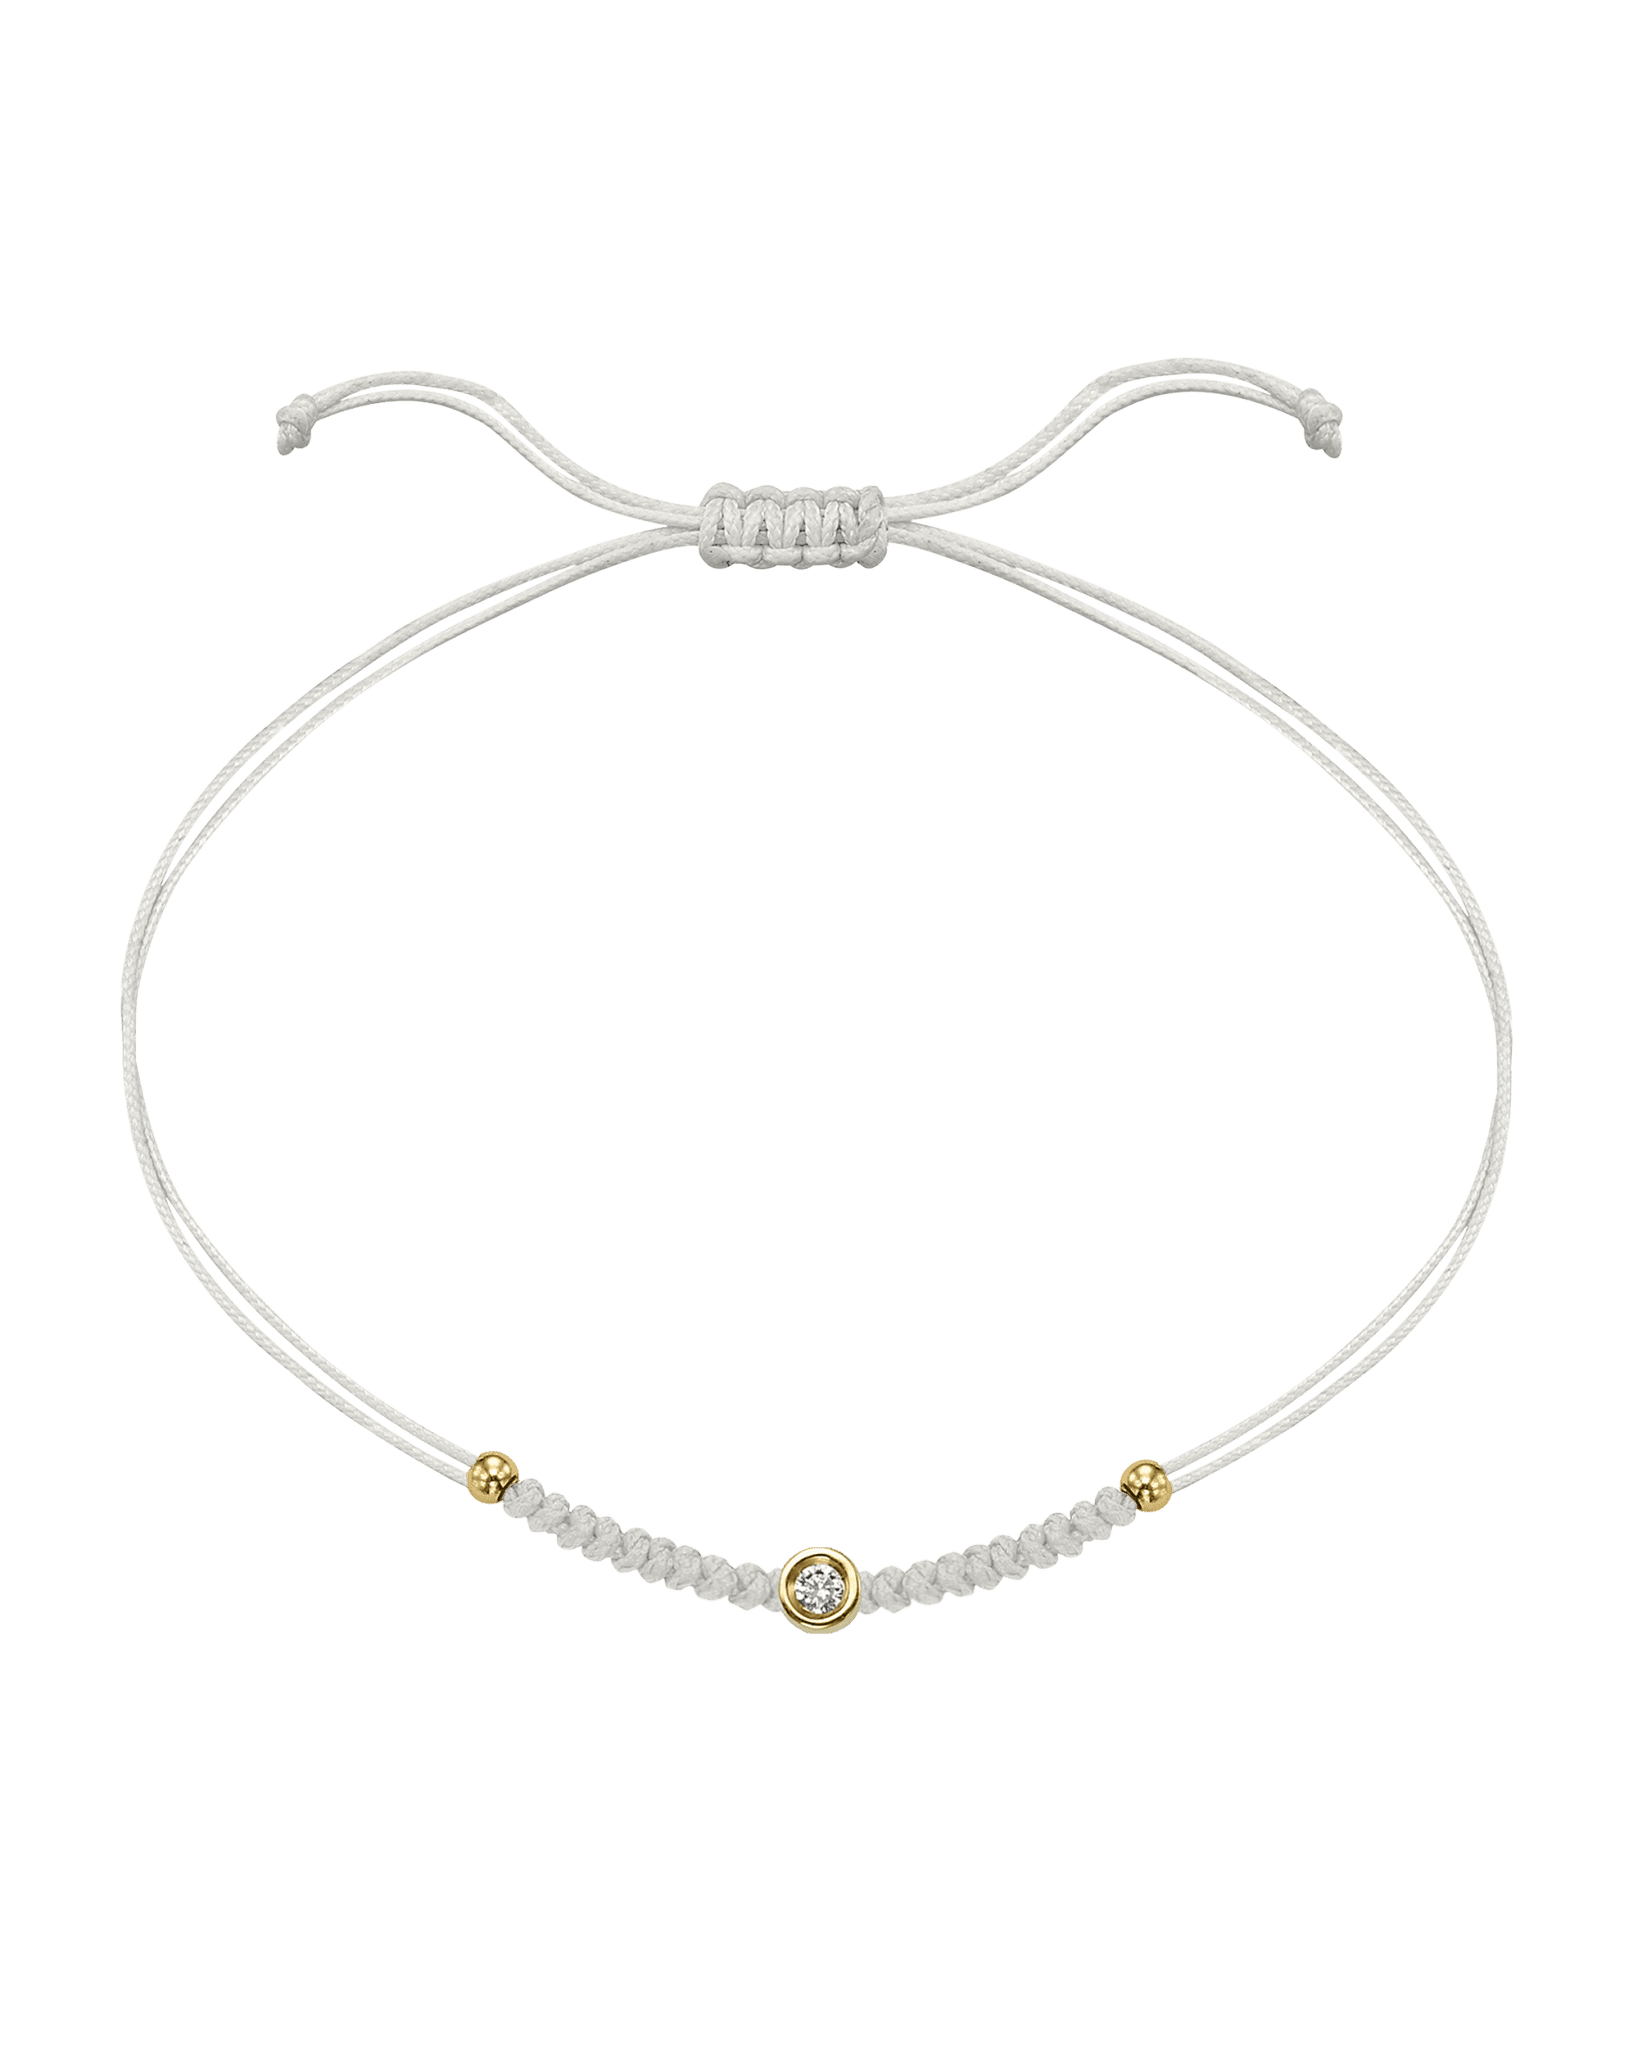 Solid Gold Sphere String of Love - 14K Yellow Gold Bracelet 14K Solid Gold Pearl Small: 0.03ct 